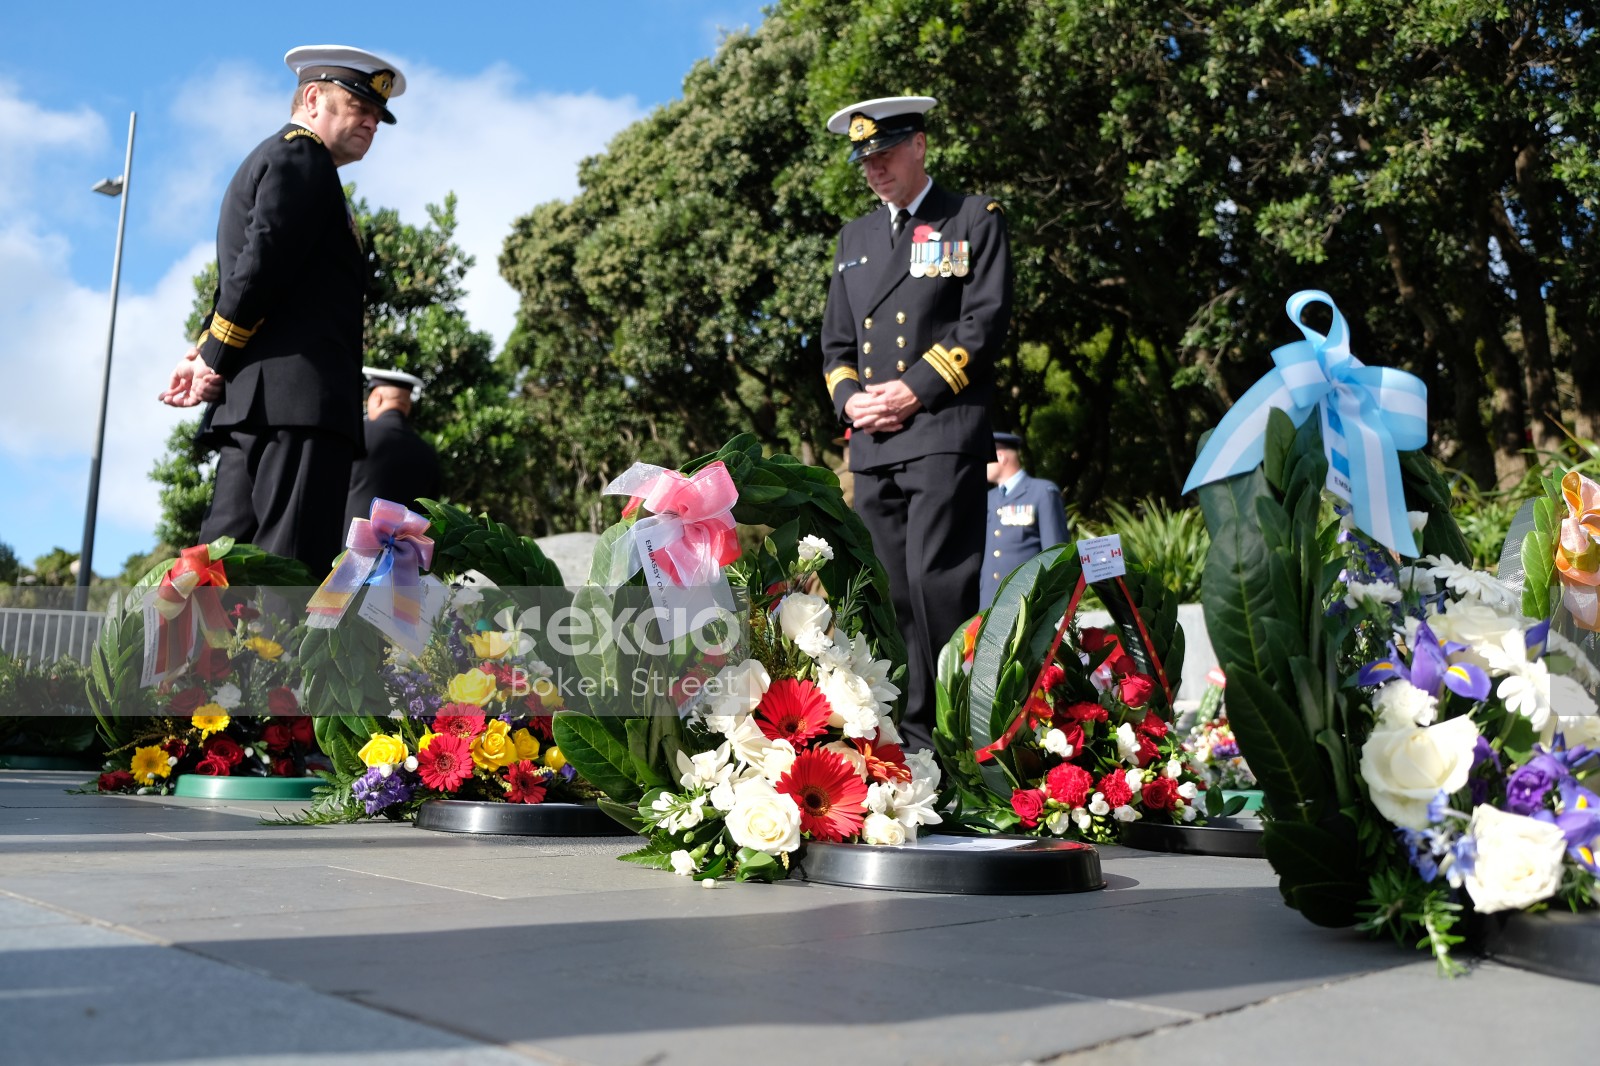 Wreaths for the fallen soldiers on Anzac Day 2017